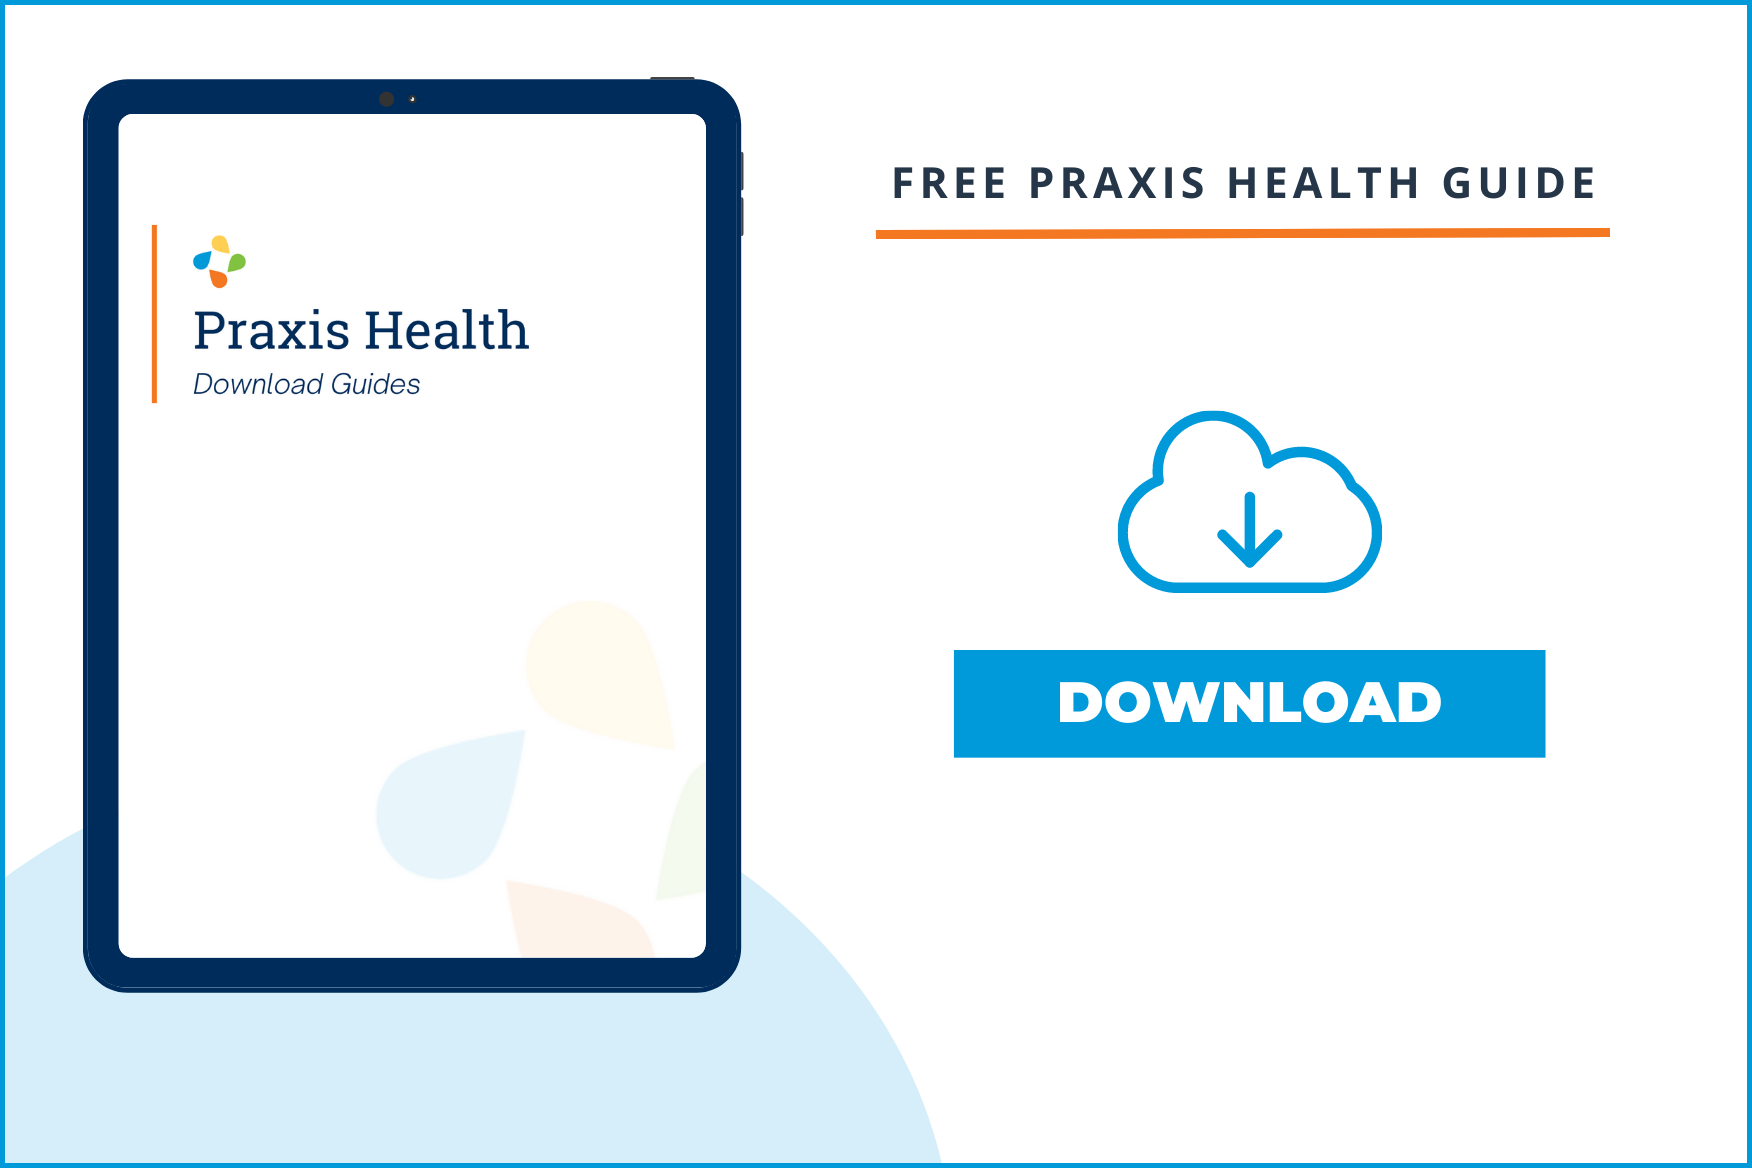 Free PRAXIS HEALTH guide download horizontal | Pacific Medical Group